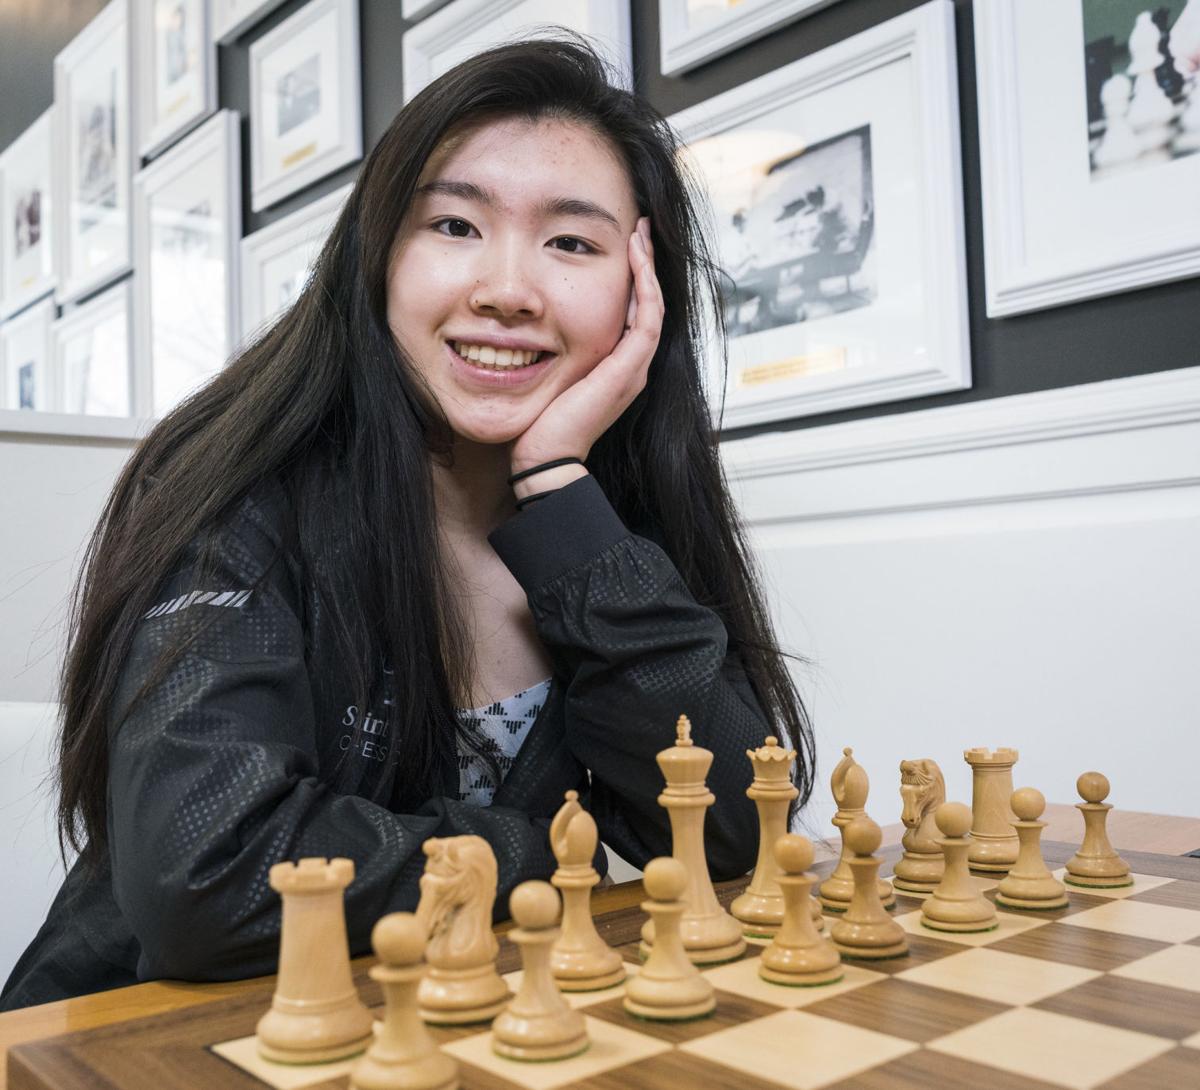 This teenage chess player from Ashburn is among the world's best, News